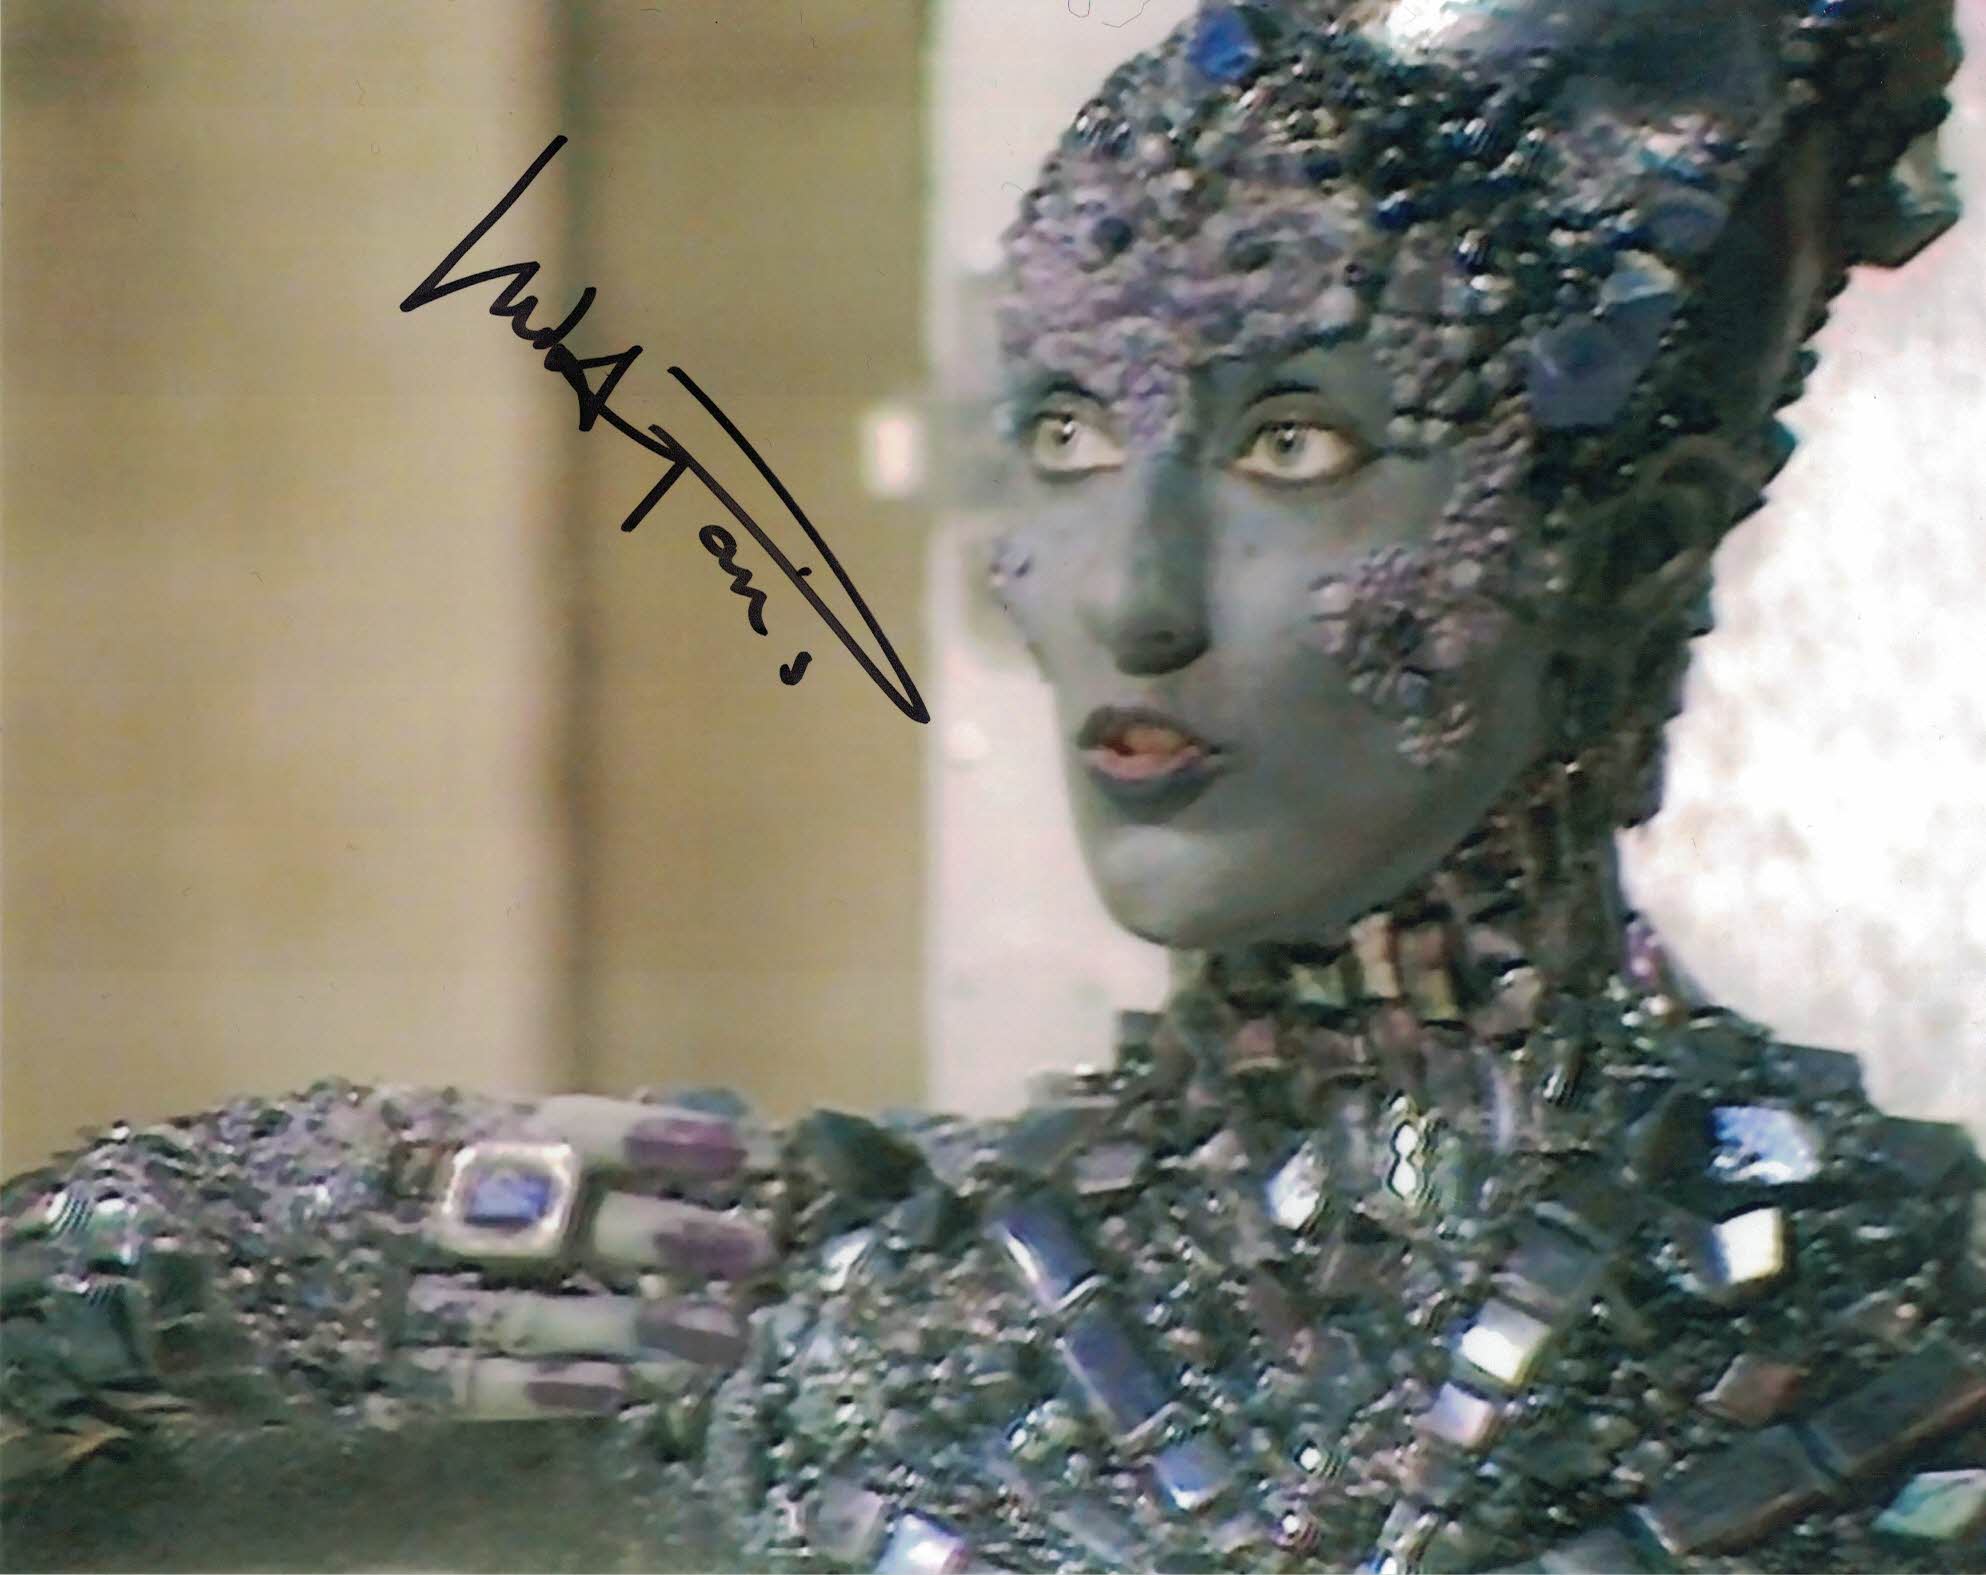 JUDITH PARIS - Eldrad - Dr Who The Hand of Fear- hand signed 10 x 8 photo